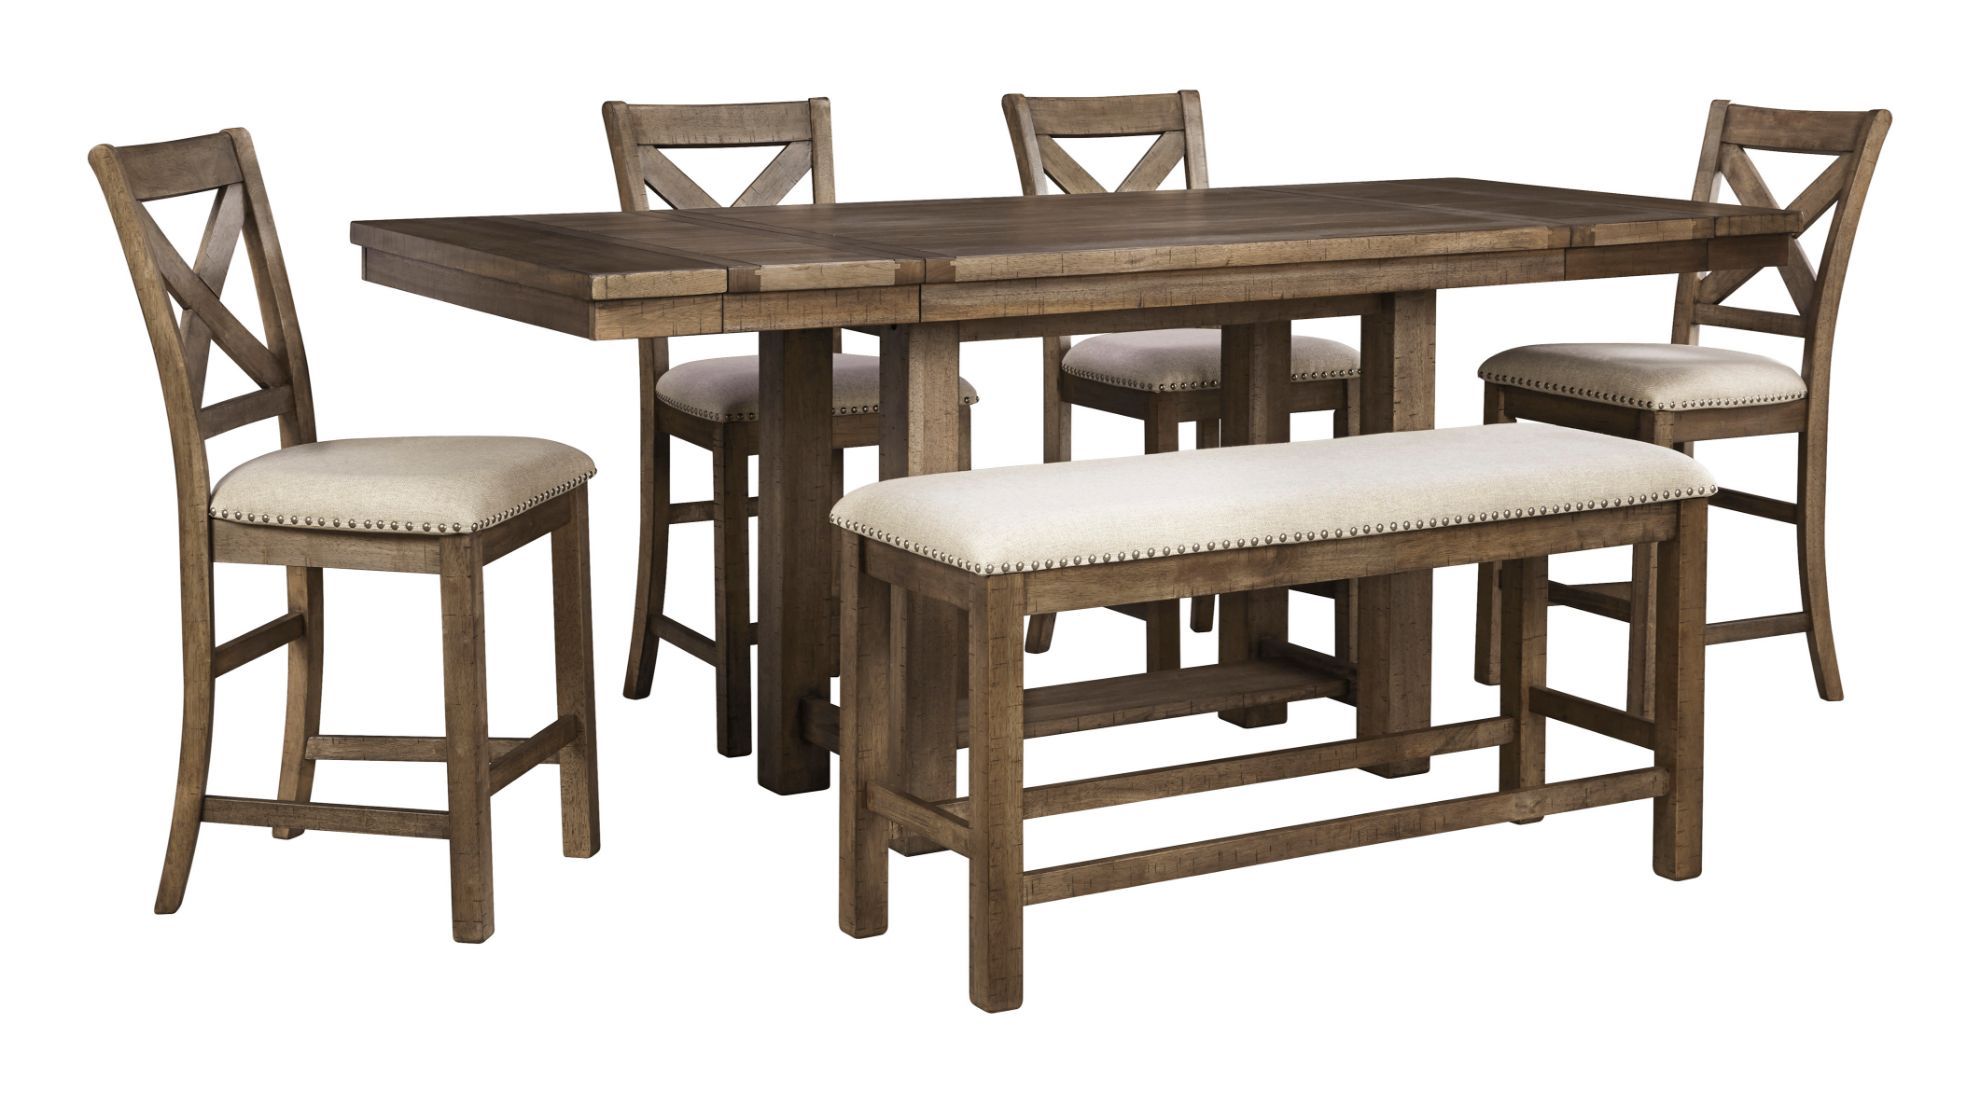 Moriville Counter Table with Four Stools and Bench